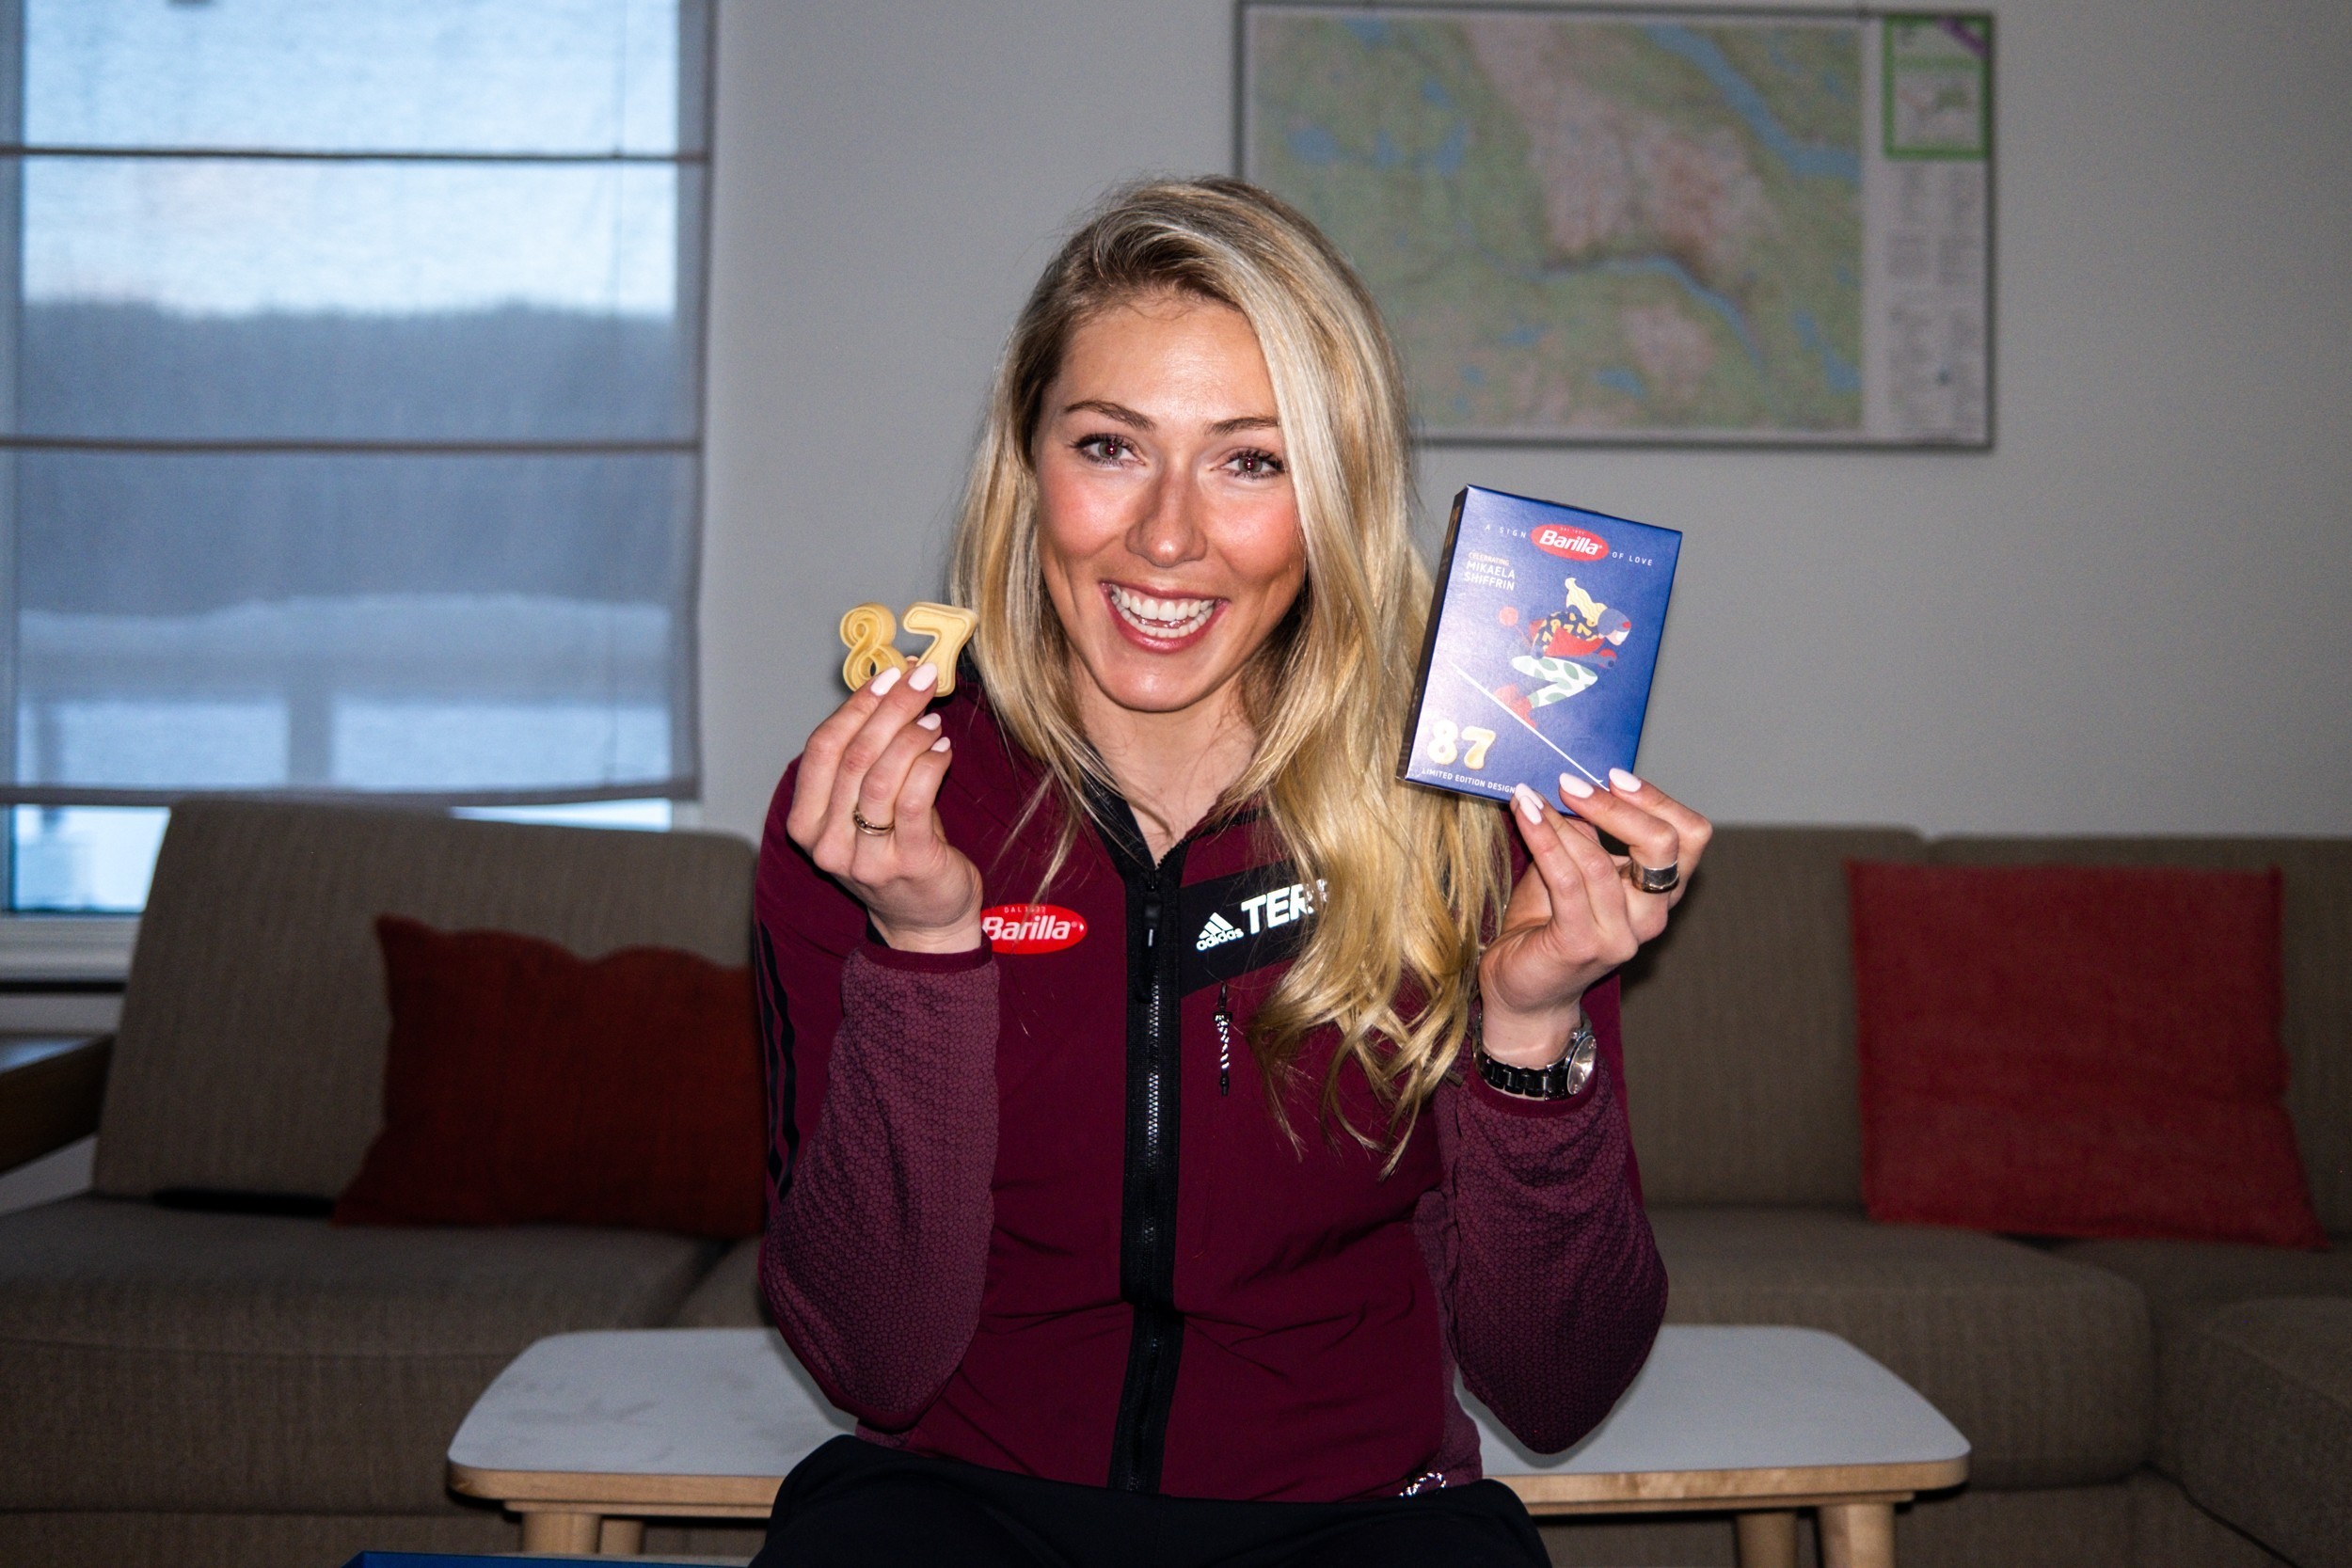 Barilla & Mikaela Shiffrin: Greatness starts with a great recipe - Pack No. 47